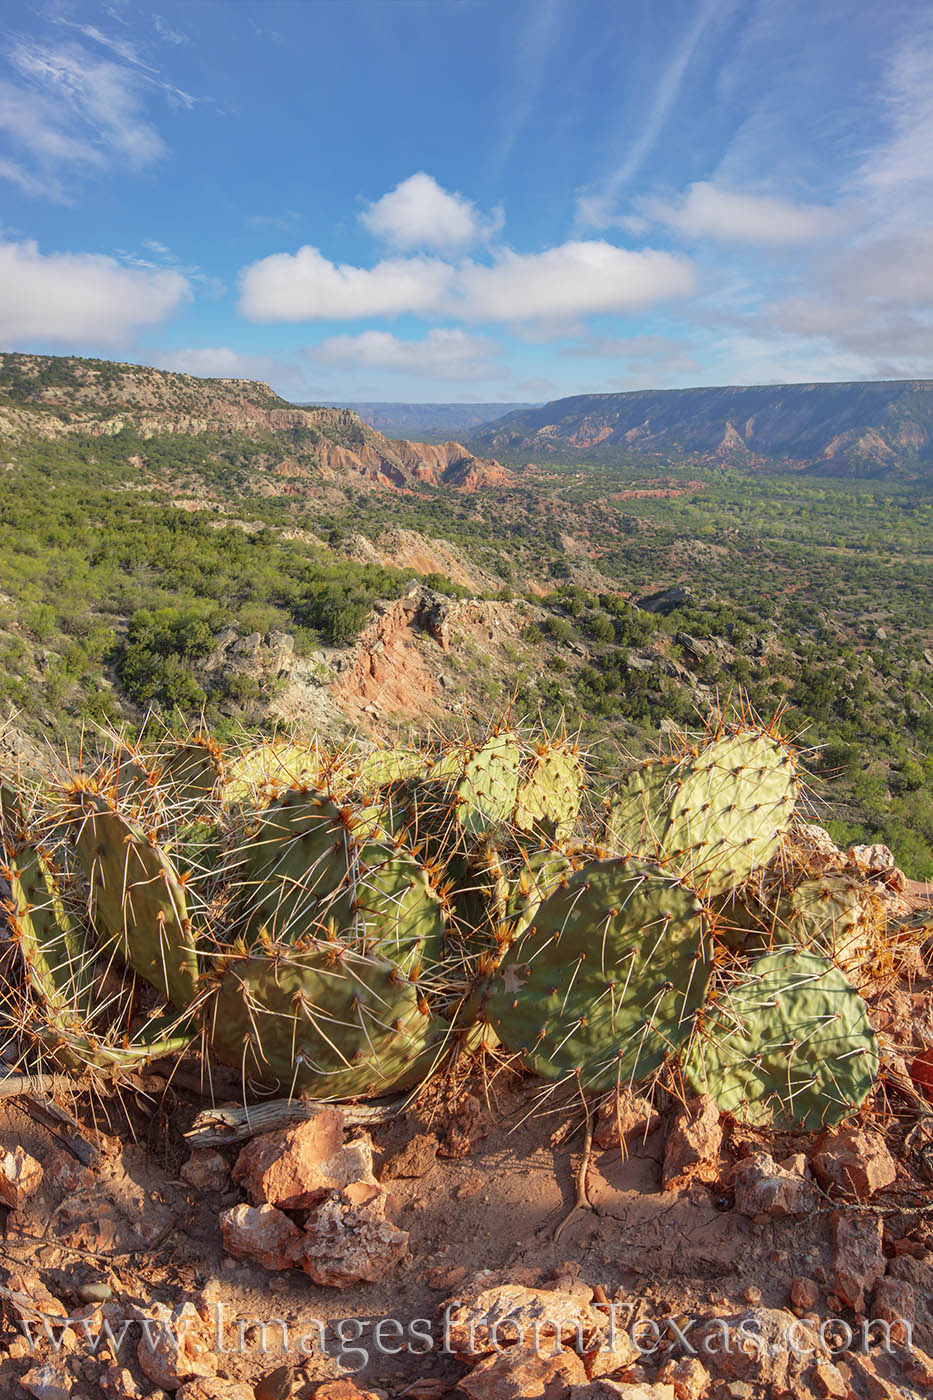 Prickly Pear grow along the edge of the Rock Garden hiking trail in Palo Duro Canyon State Park.